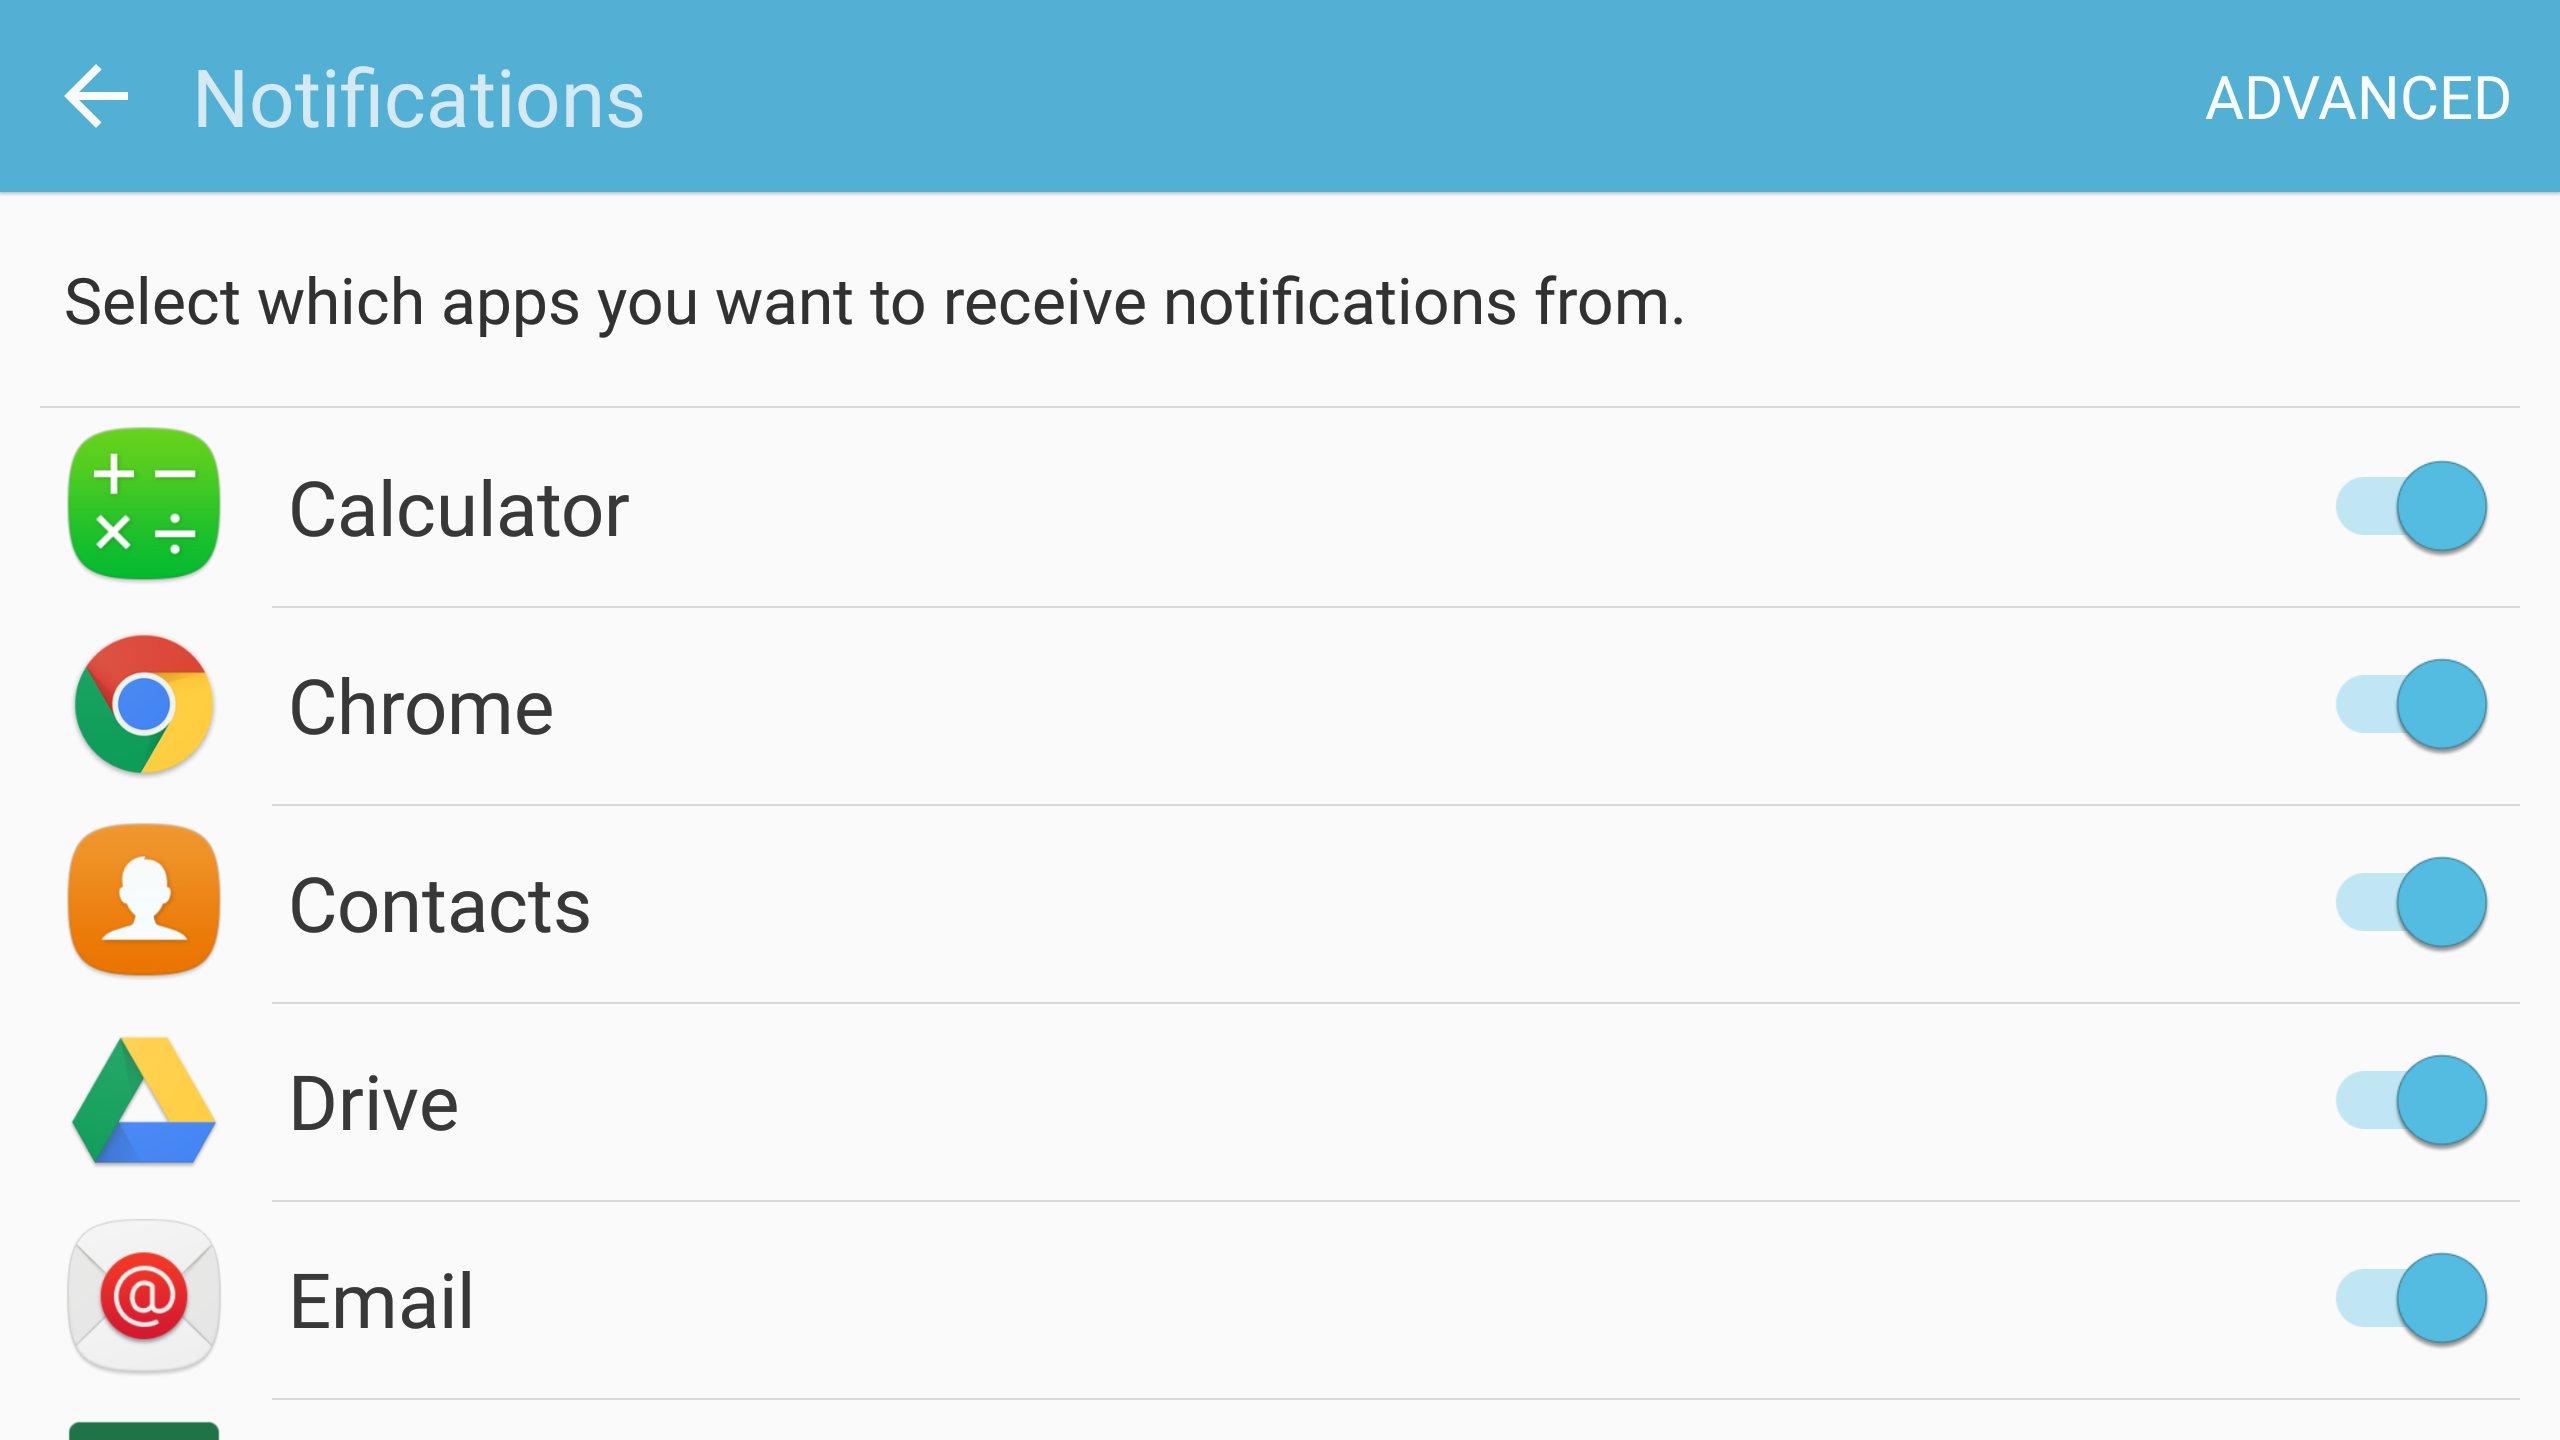 7. Save yourself a notifications deluge